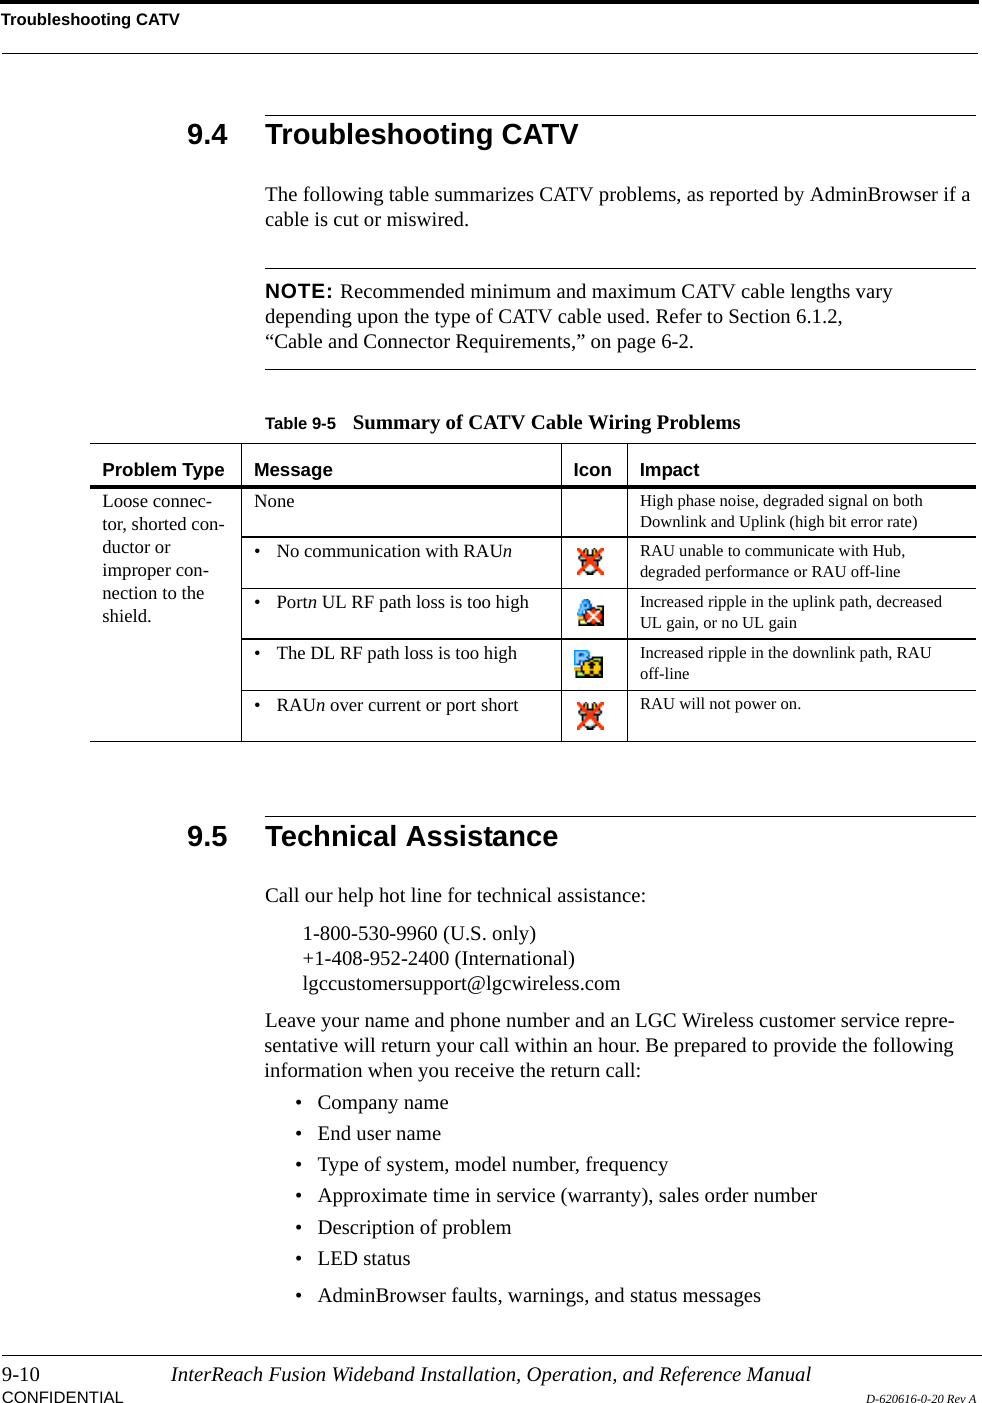 Troubleshooting CATV9-10 InterReach Fusion Wideband Installation, Operation, and Reference ManualCONFIDENTIAL D-620616-0-20 Rev A9.4 Troubleshooting CATVThe following table summarizes CATV problems, as reported by AdminBrowser if a cable is cut or miswired.NOTE: Recommended minimum and maximum CATV cable lengths vary depending upon the type of CATV cable used. Refer to Section 6.1.2, “Cable and Connector Requirements,” on page 6-2.9.5 Technical AssistanceCall our help hot line for technical assistance:1-800-530-9960 (U.S. only)+1-408-952-2400 (International)lgccustomersupport@lgcwireless.comLeave your name and phone number and an LGC Wireless customer service repre-sentative will return your call within an hour. Be prepared to provide the following information when you receive the return call:• Company name• End user name• Type of system, model number, frequency• Approximate time in service (warranty), sales order number• Description of problem• LED status• AdminBrowser faults, warnings, and status messagesTable 9-5 Summary of CATV Cable Wiring ProblemsProblem Type Message Icon ImpactLoose connec-tor, shorted con-ductor or improper con-nection to the shield.None High phase noise, degraded signal on both Downlink and Uplink (high bit error rate)• No communication with RAUn  RAU unable to communicate with Hub, degraded performance or RAU off-line• Portn UL RF path loss is too high Increased ripple in the uplink path, decreased UL gain, or no UL gain• The DL RF path loss is too high Increased ripple in the downlink path, RAU off-line•RAUn over current or port short RAU will not power on.